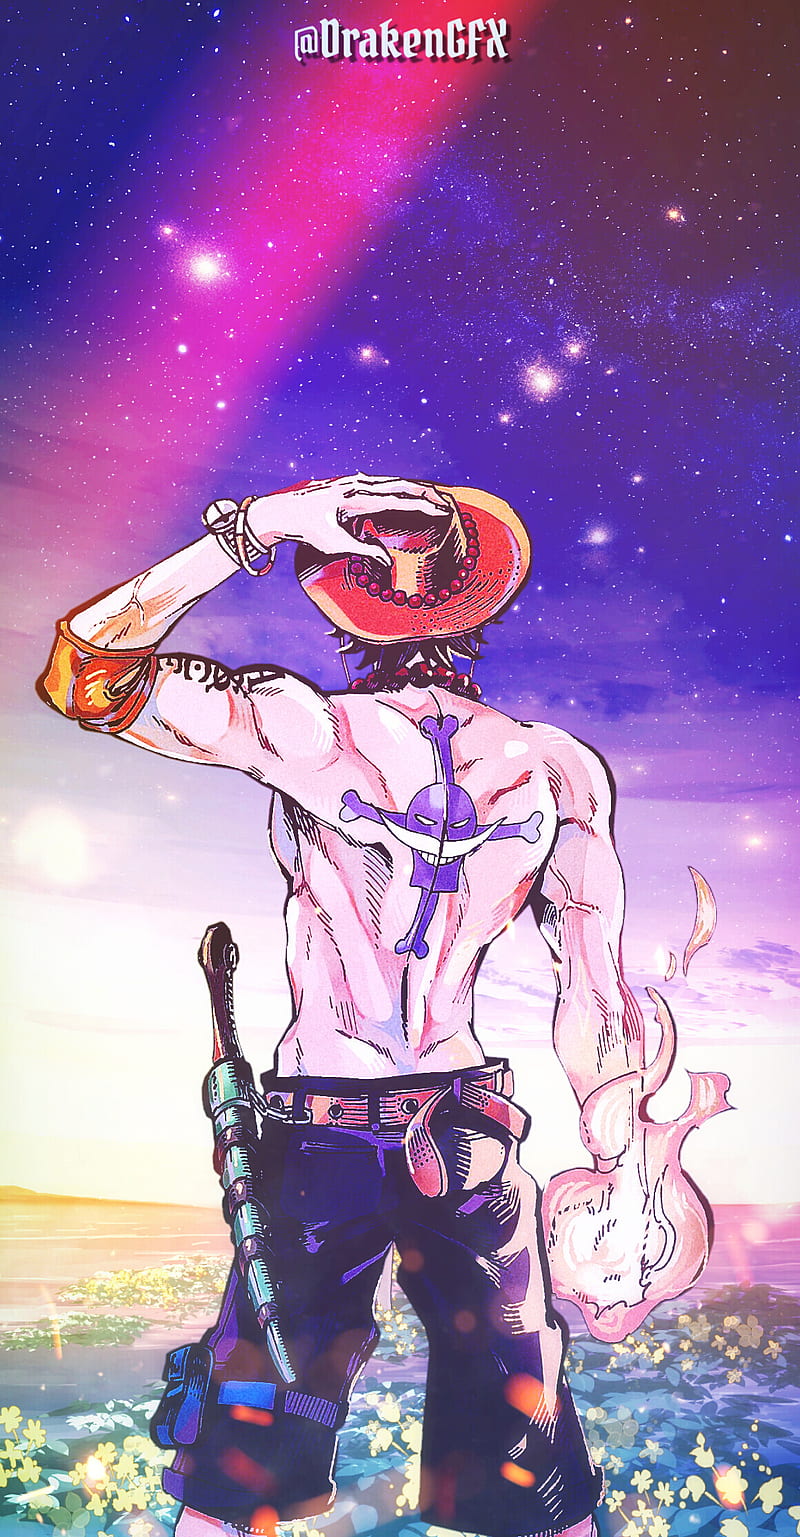 One Piece, iPhone, Ace, Android backgrounds, iPhone , anime art, artwork, Android, naruto, snk, Aesthetic, Android , Portgas D Ace, Anime aesthetic, manga, phone , anime, iPhone backgrounds, HD phone wallpaper